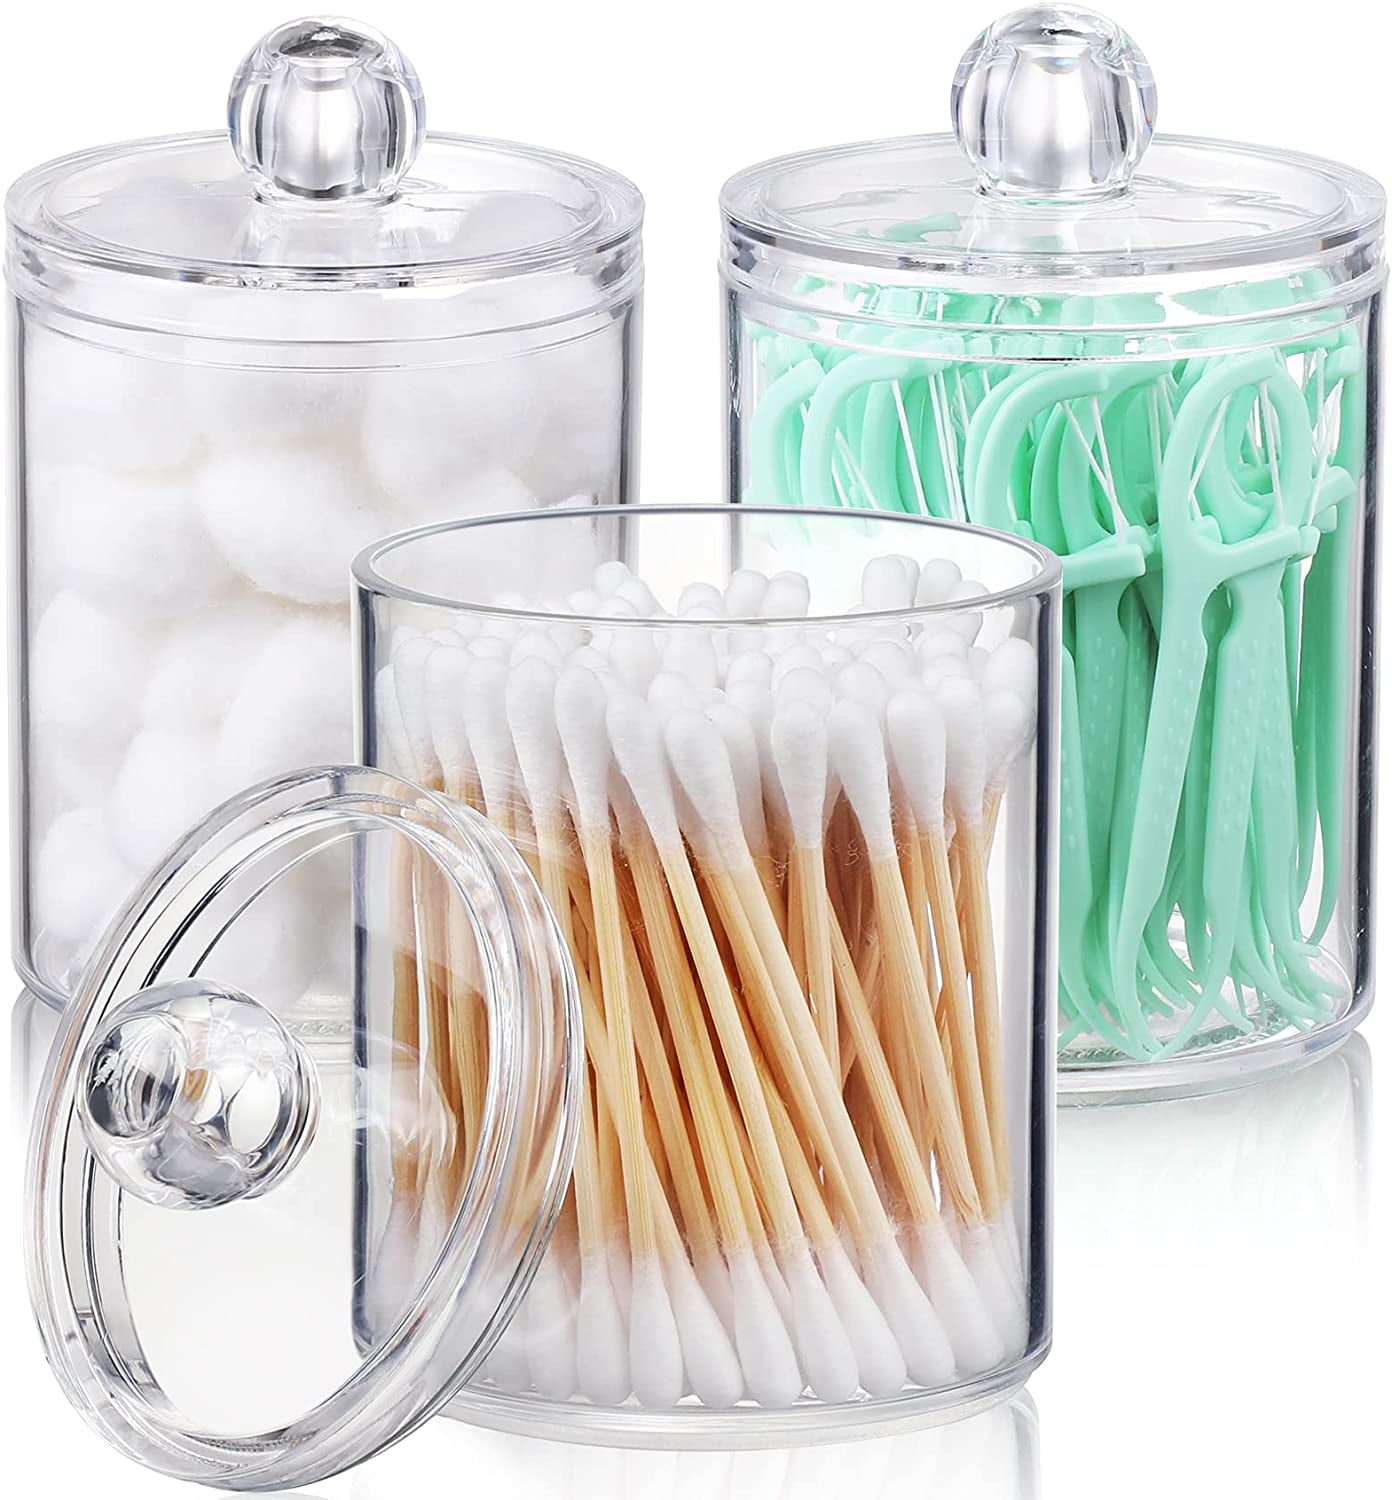 Makeup Cotton Ball Container Cotton Bud Holder Container Clear Acrylic Storage Jar with Lid Cotton Ball Makeup Pad Swab Organiser Clear Acrylic Cotton Ball and Swab Holder 3pcs 